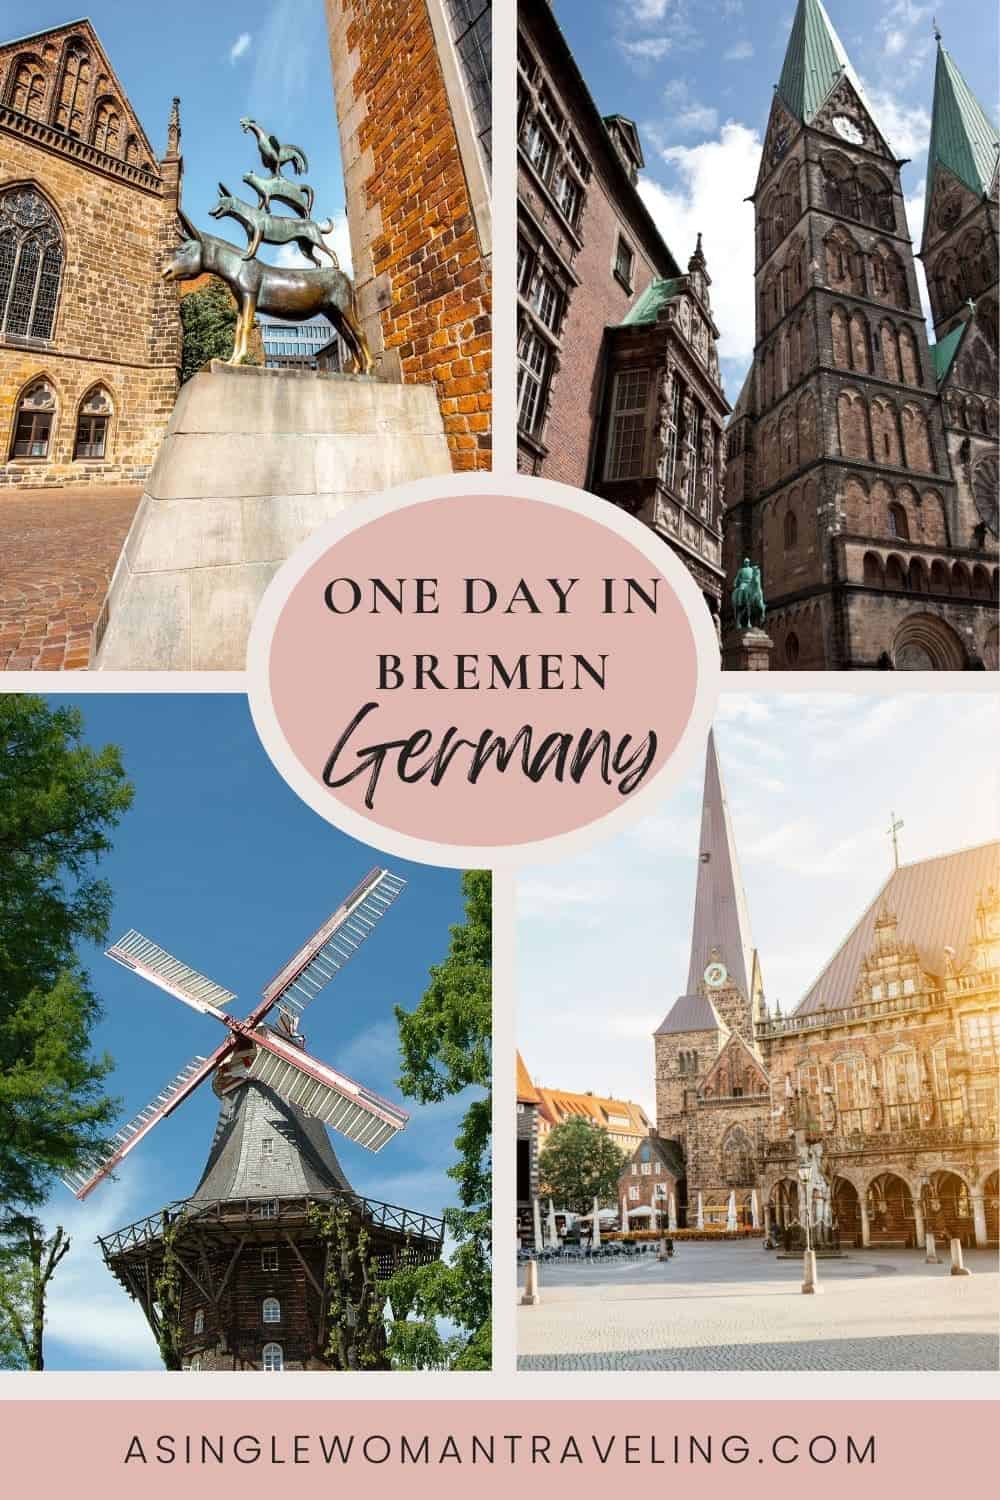 A vibrant montage highlighting Bremen's diverse highlights, including the serene Bürgerpark, the historical Bottcherstraße, and the charming medieval structures of the Schnoor neighborhood